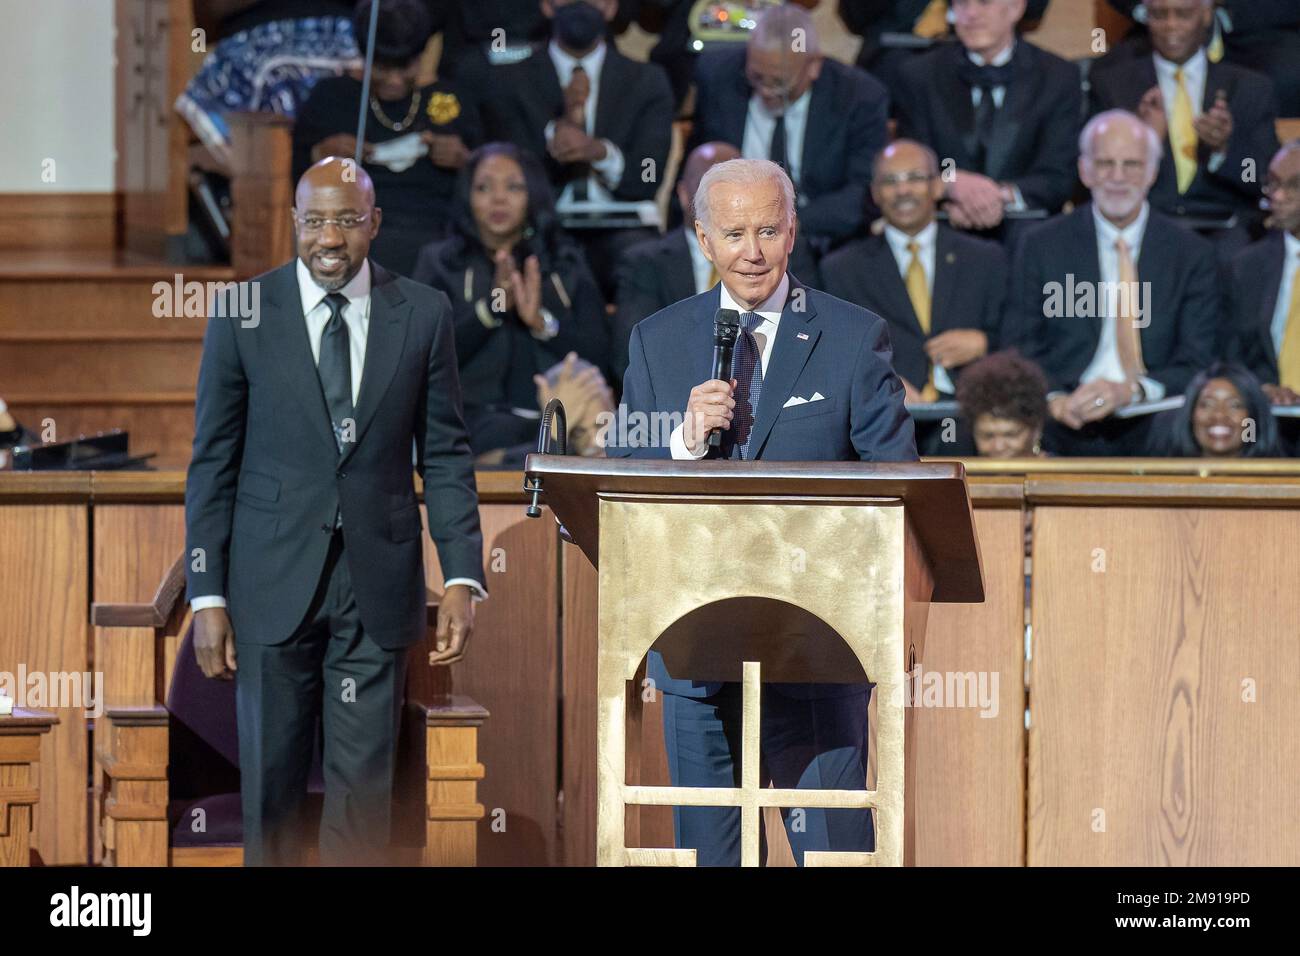 Atlanta, United States Of America. 15th Jan, 2023. Atlanta, United States of America. 15 January, 2023. U.S President Joe Biden, delivers remarks during a celebration of Martin Luther King Jr. Day as Senator Raphael Warnock, left, look on at Ebenezer Baptist Church, January 15, 2023 in Atlanta, Georgia. Biden is the first sitting president to delivered a sermon at the church where Martin Luther King Jr. was a pastor. Credit: Adam Schultz/White House Photo/Alamy Live News Stock Photo